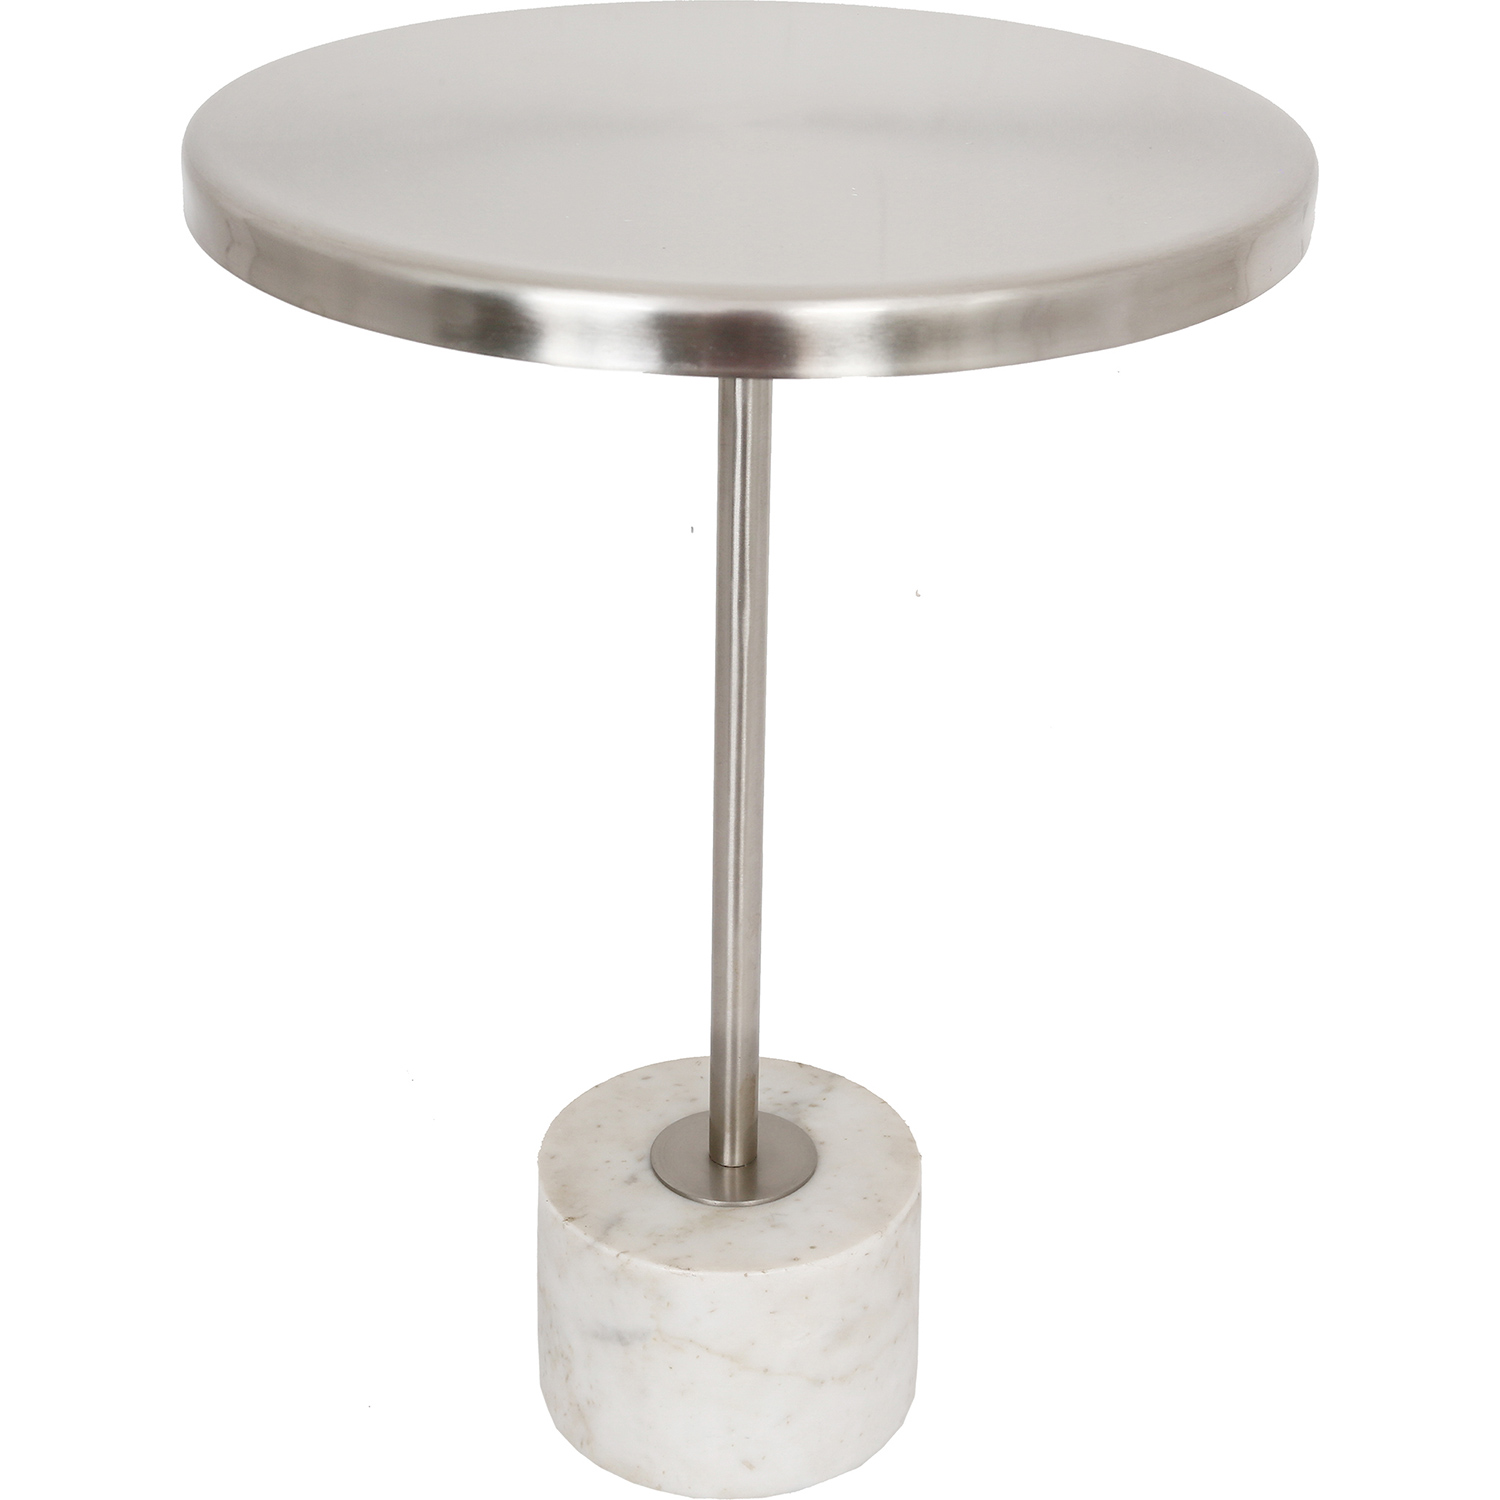 Ren-Wil Birley Accent Table - Pewter Top/White Marble Base